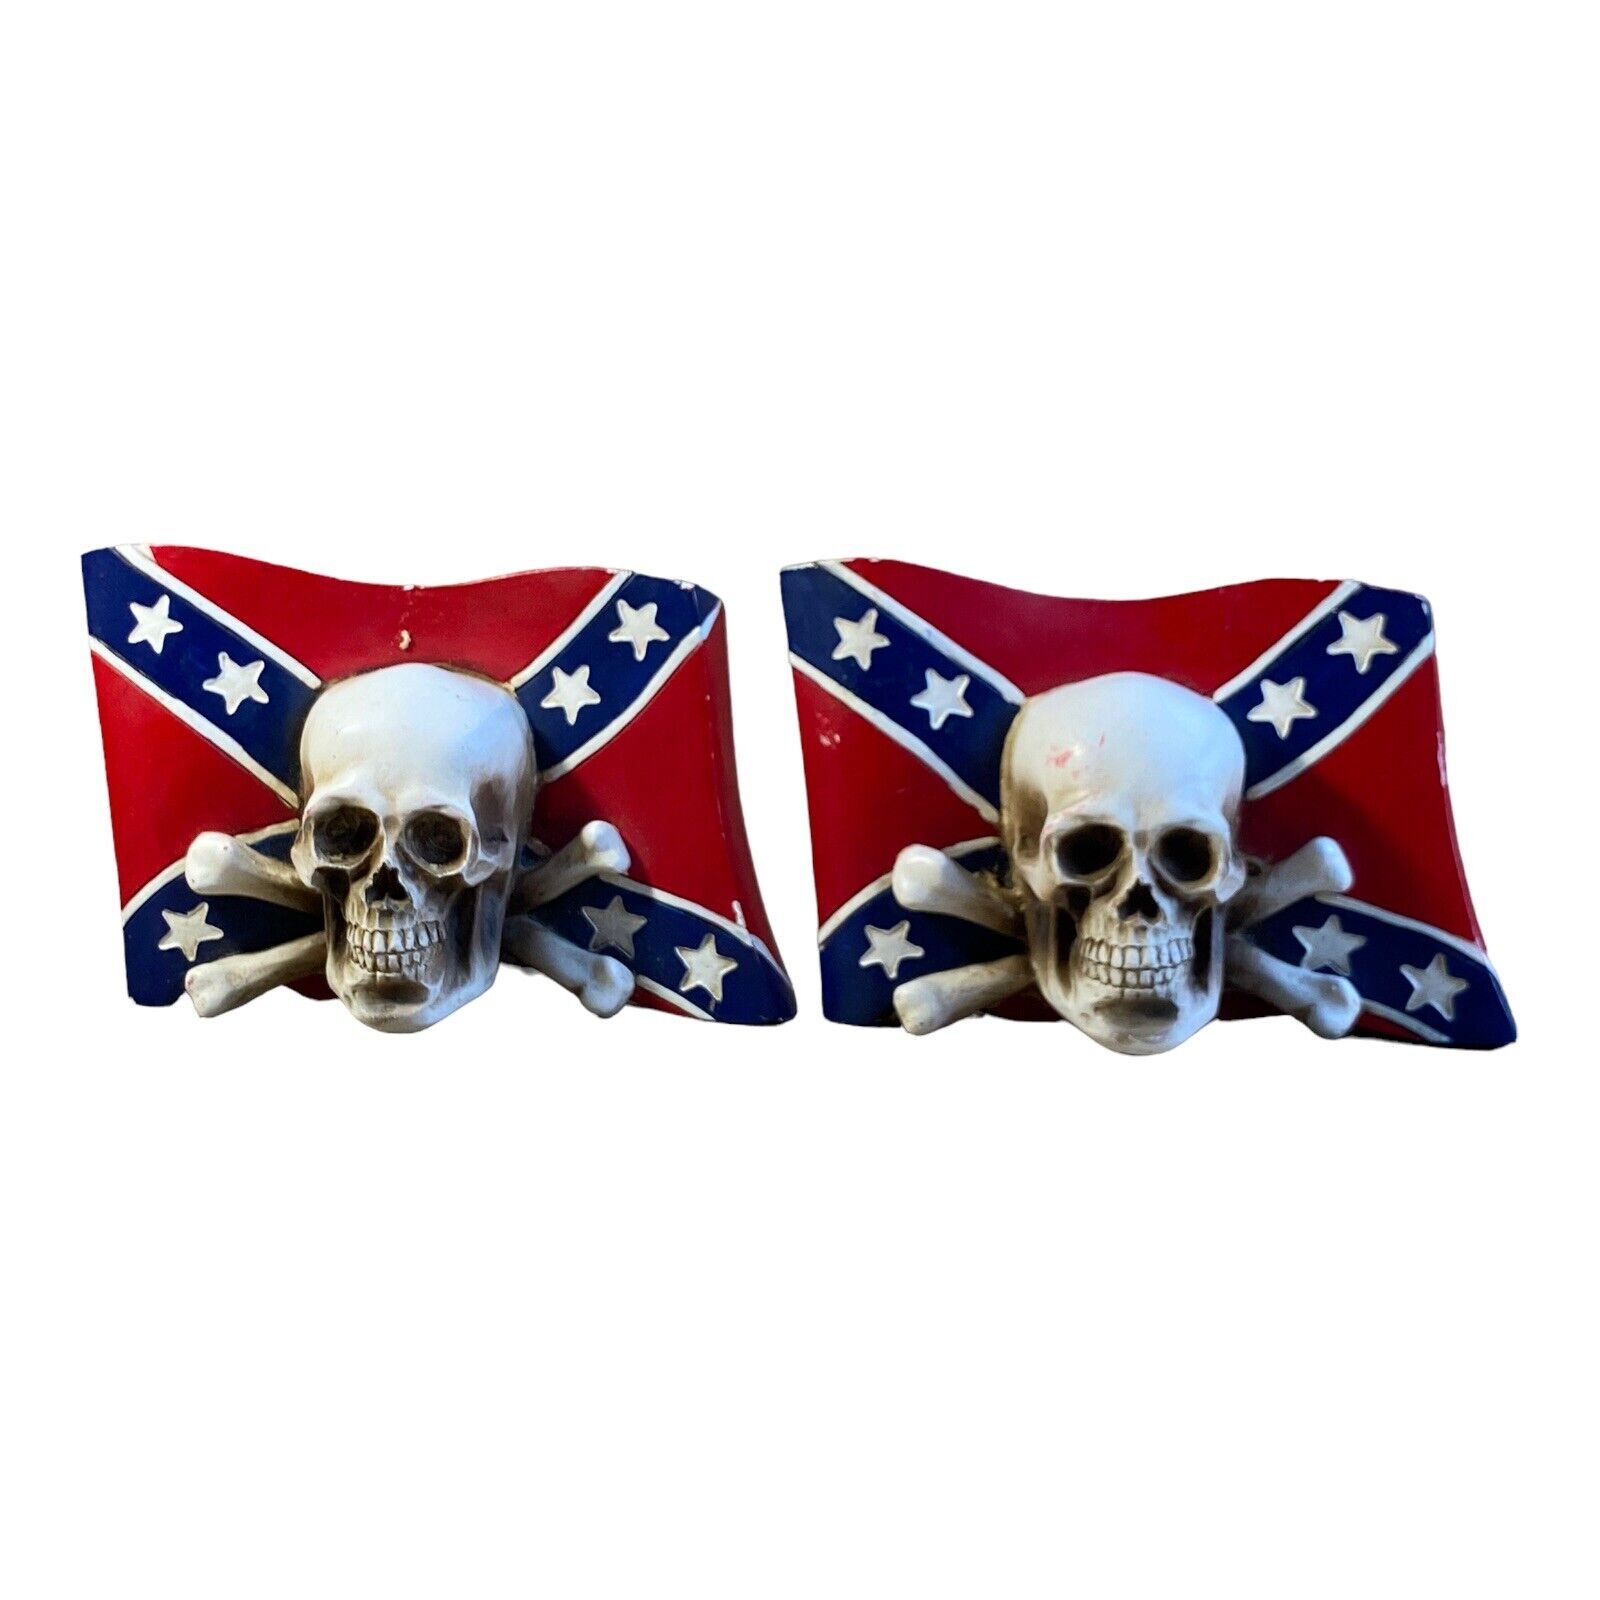 2 Vintages flag with skull Home Decoration ￼ Rare 6”x5”￼